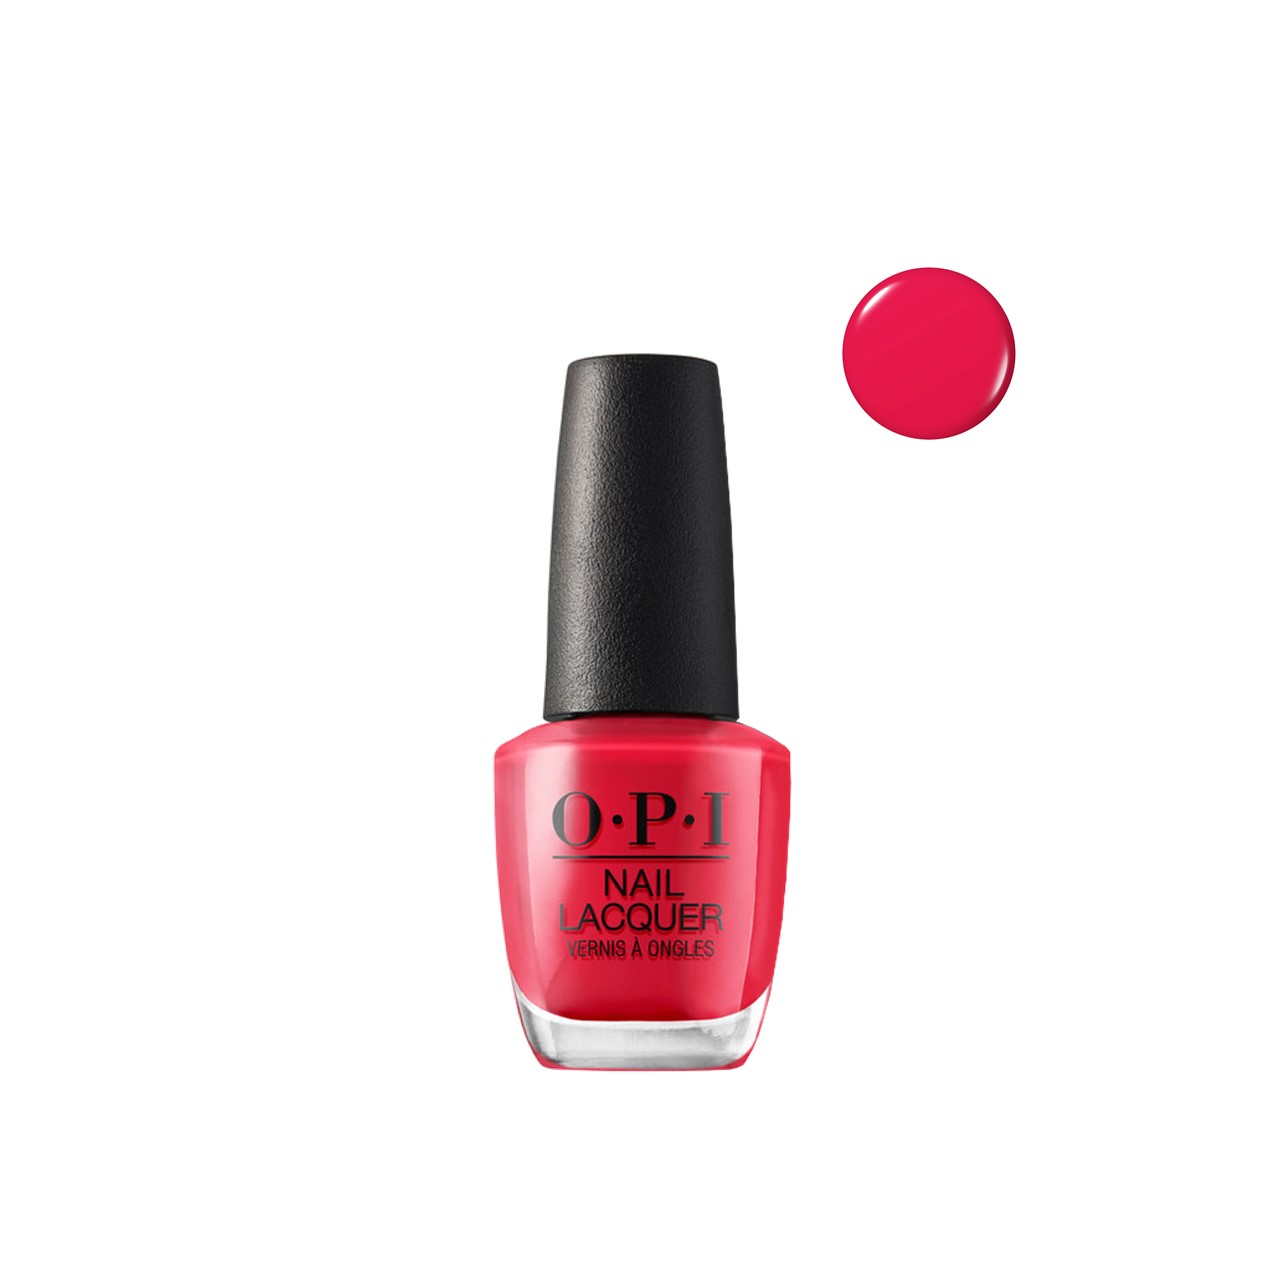 OPI Nail Lacquer We Seafood and Eat It 15ml (0.51fl oz)